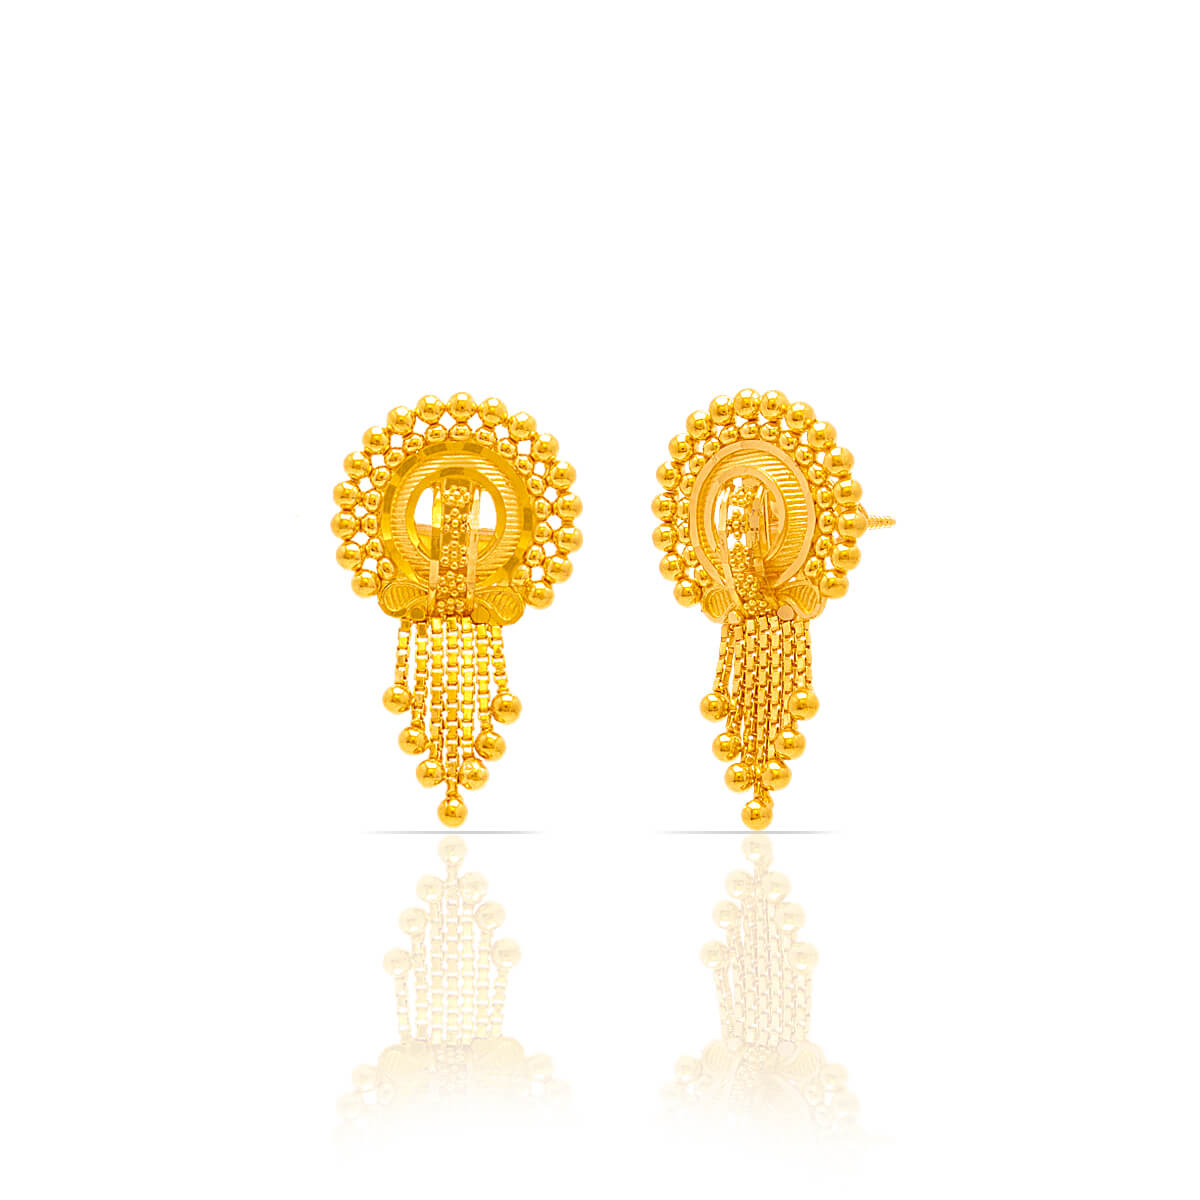 simple daily wear gold earrings.//with weight. - YouTube-calidas.vn